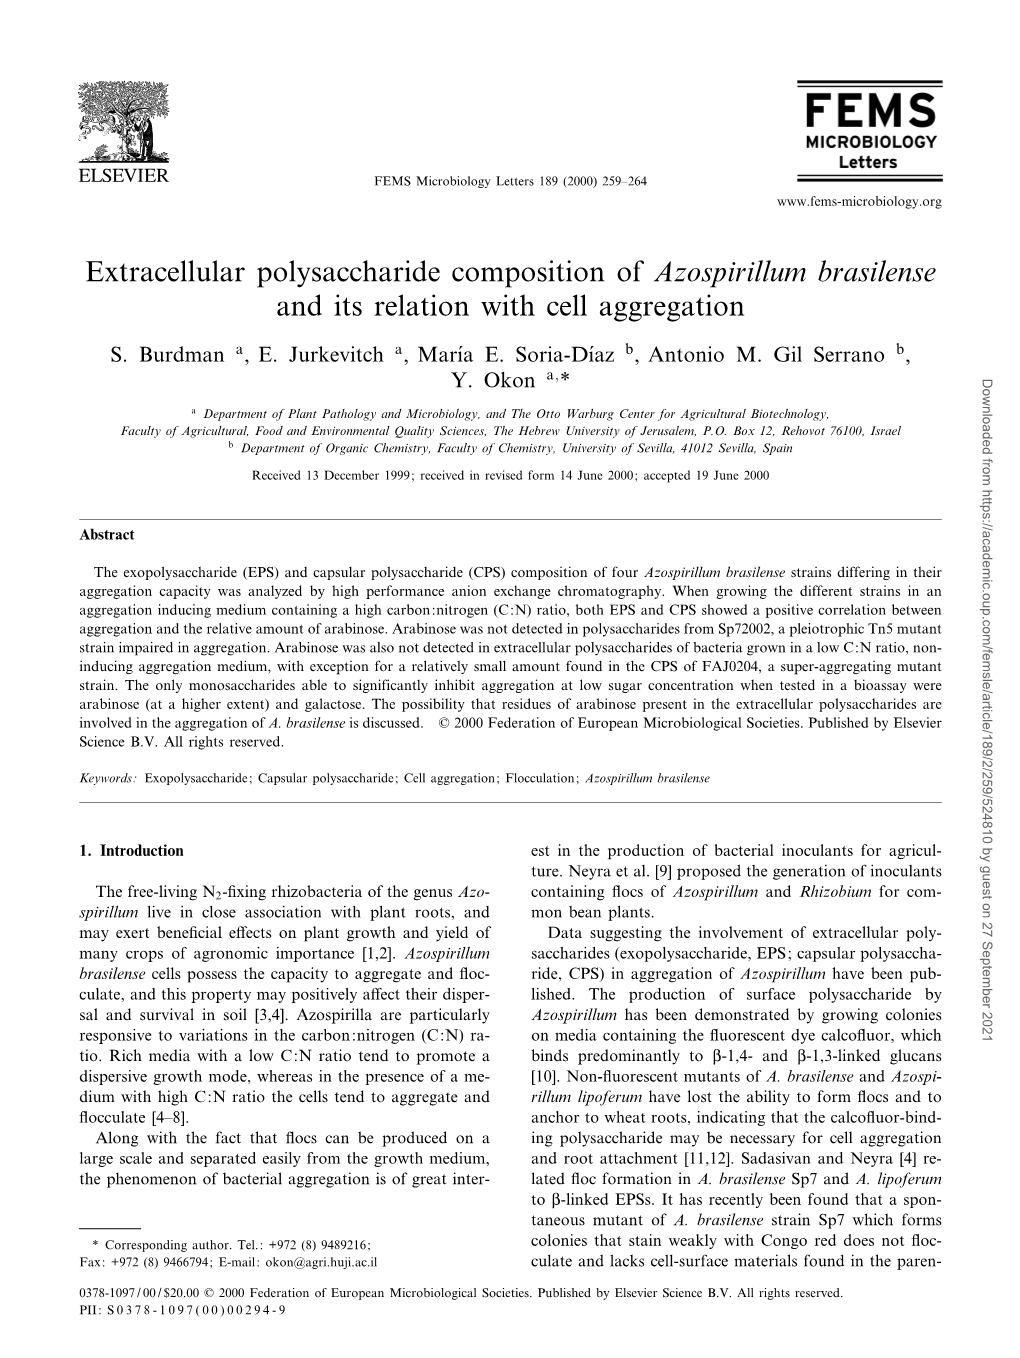 Extracellular Polysaccharide Composition of Azospirillum Brasilense and Its Relation with Cell Aggregation